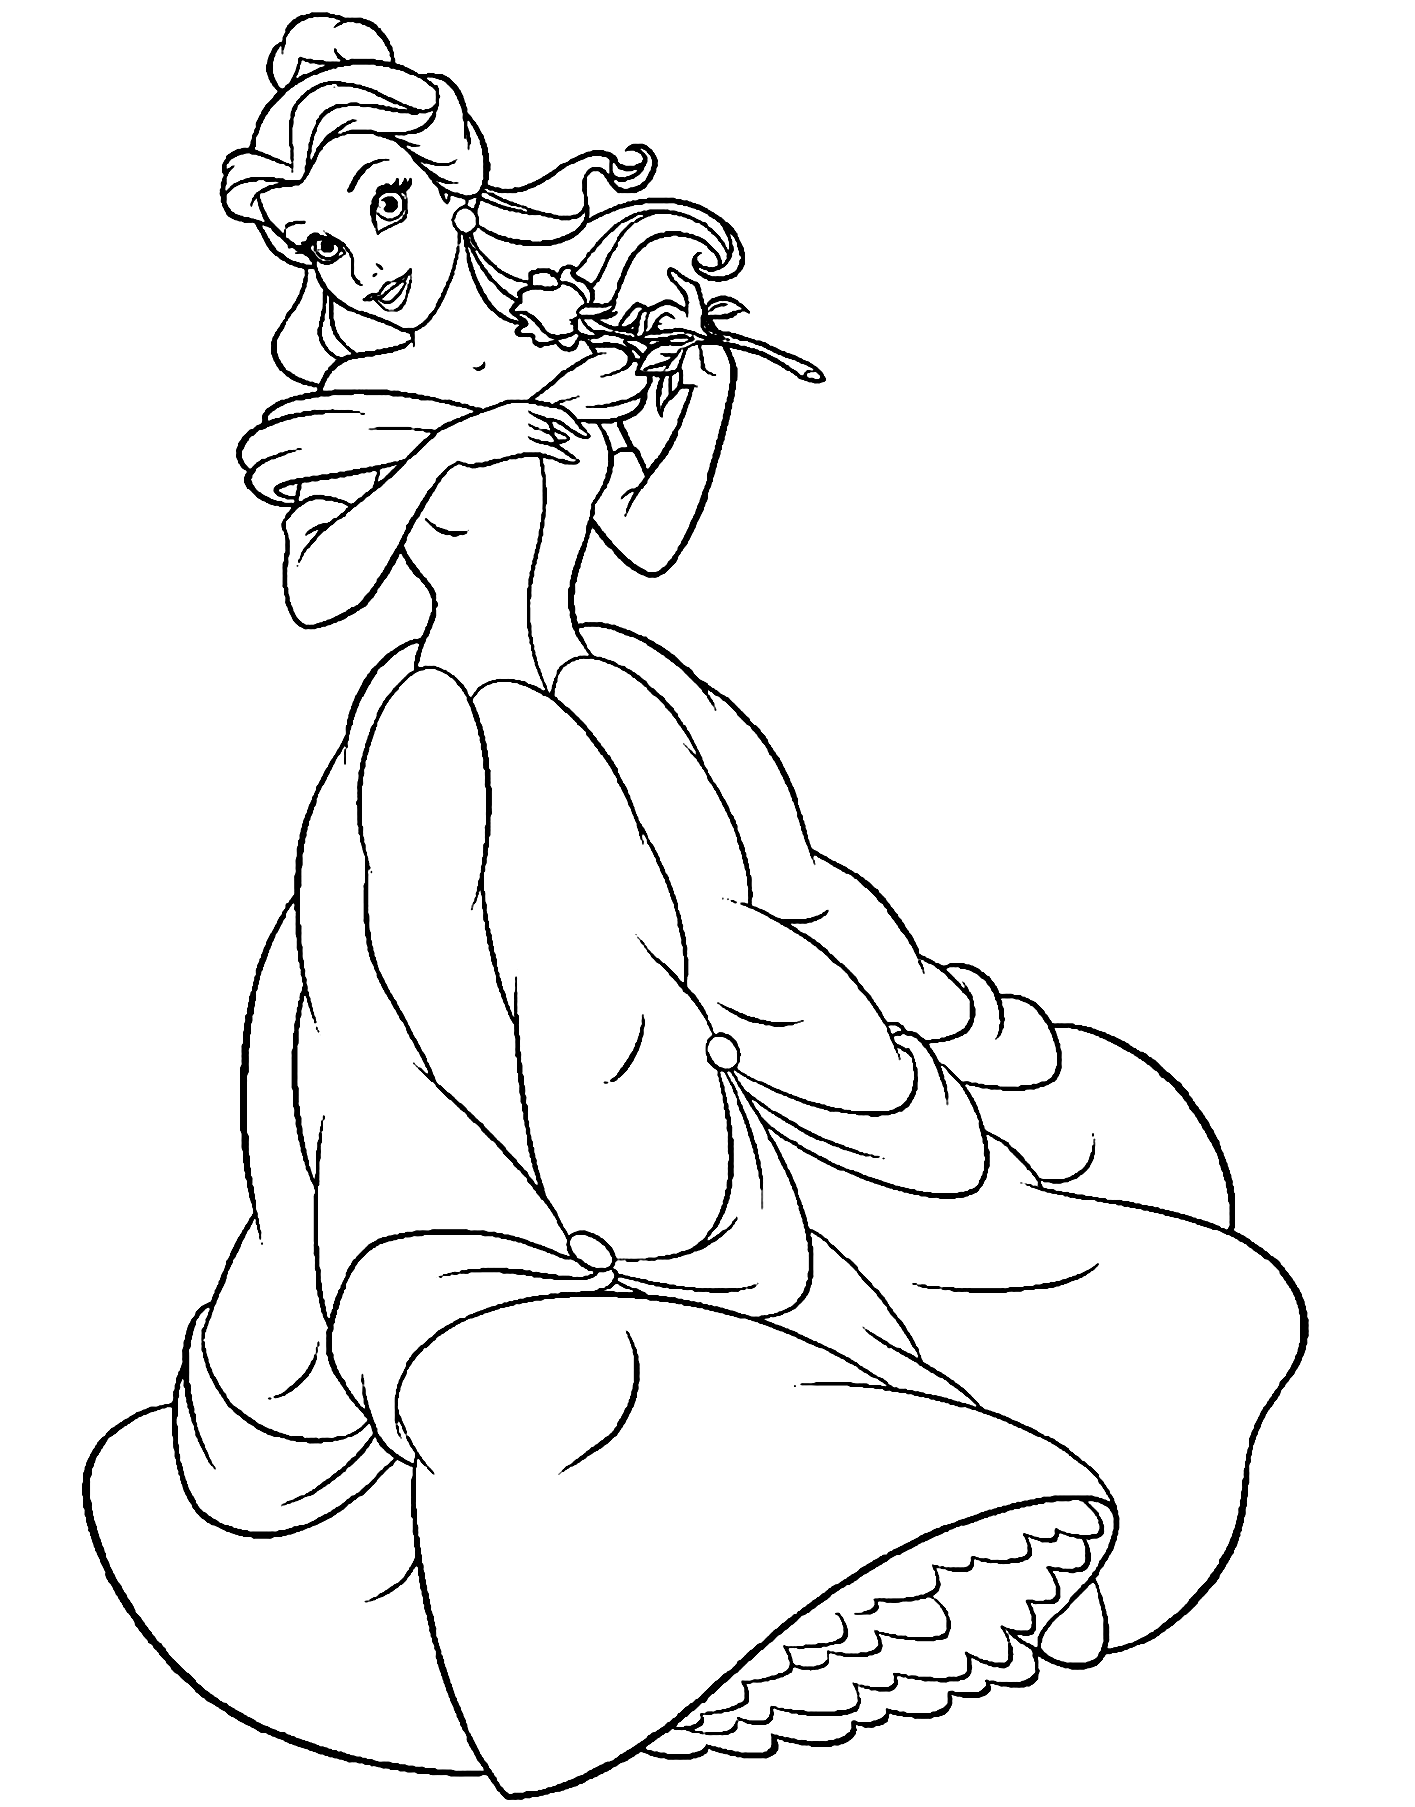 Beauty Belle princess coloring page